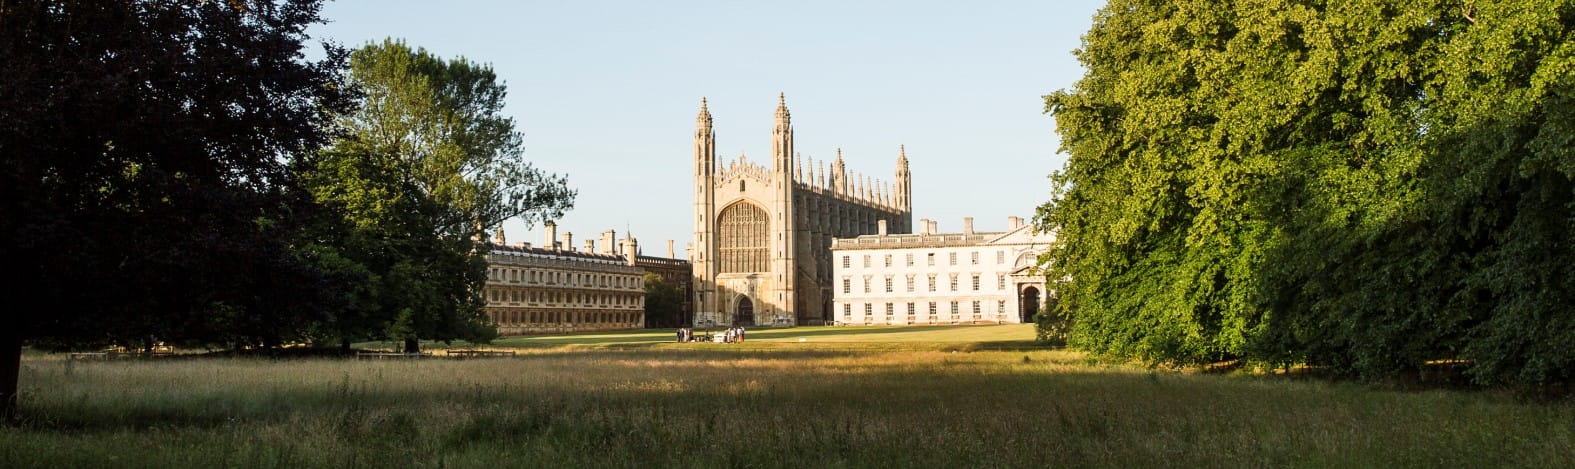 Picture of King's College Cambridge